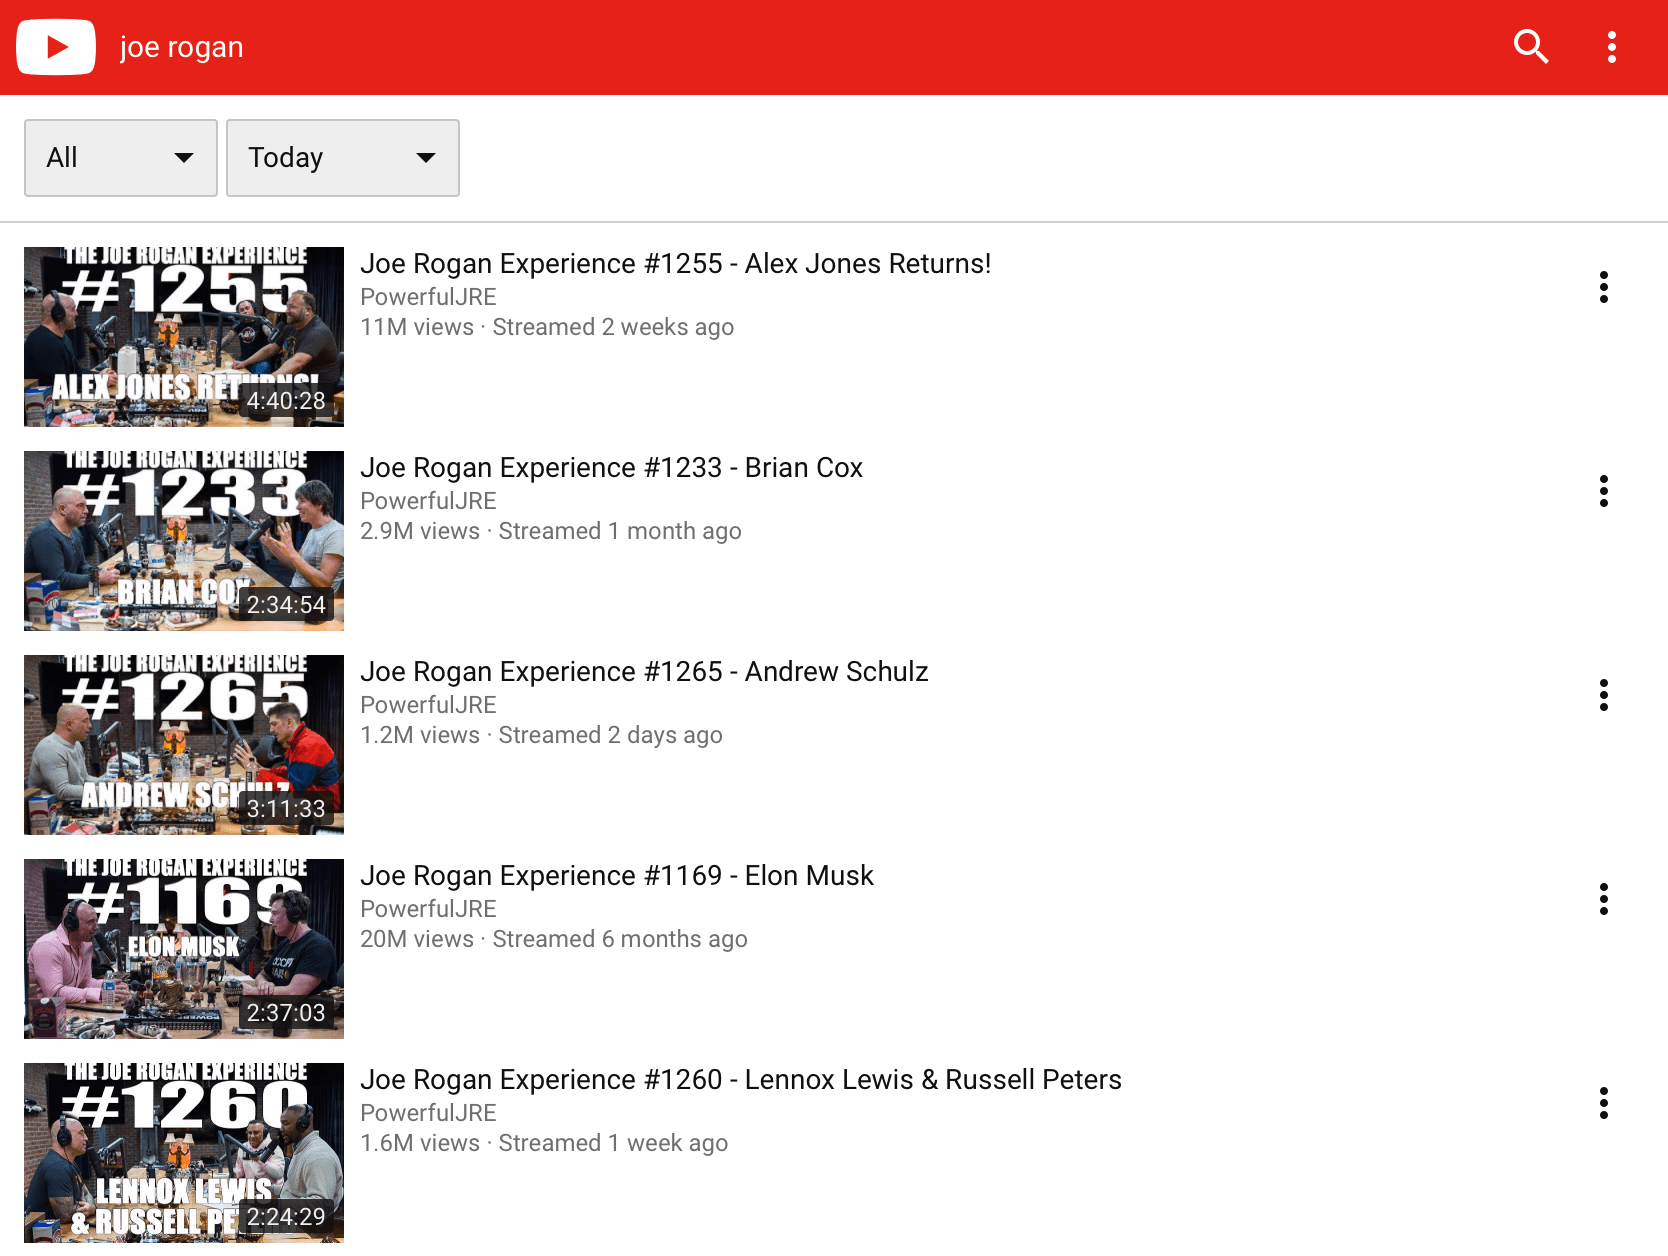 Search results for “Joe Rogan” on YouTube with the “Today” filter applied.